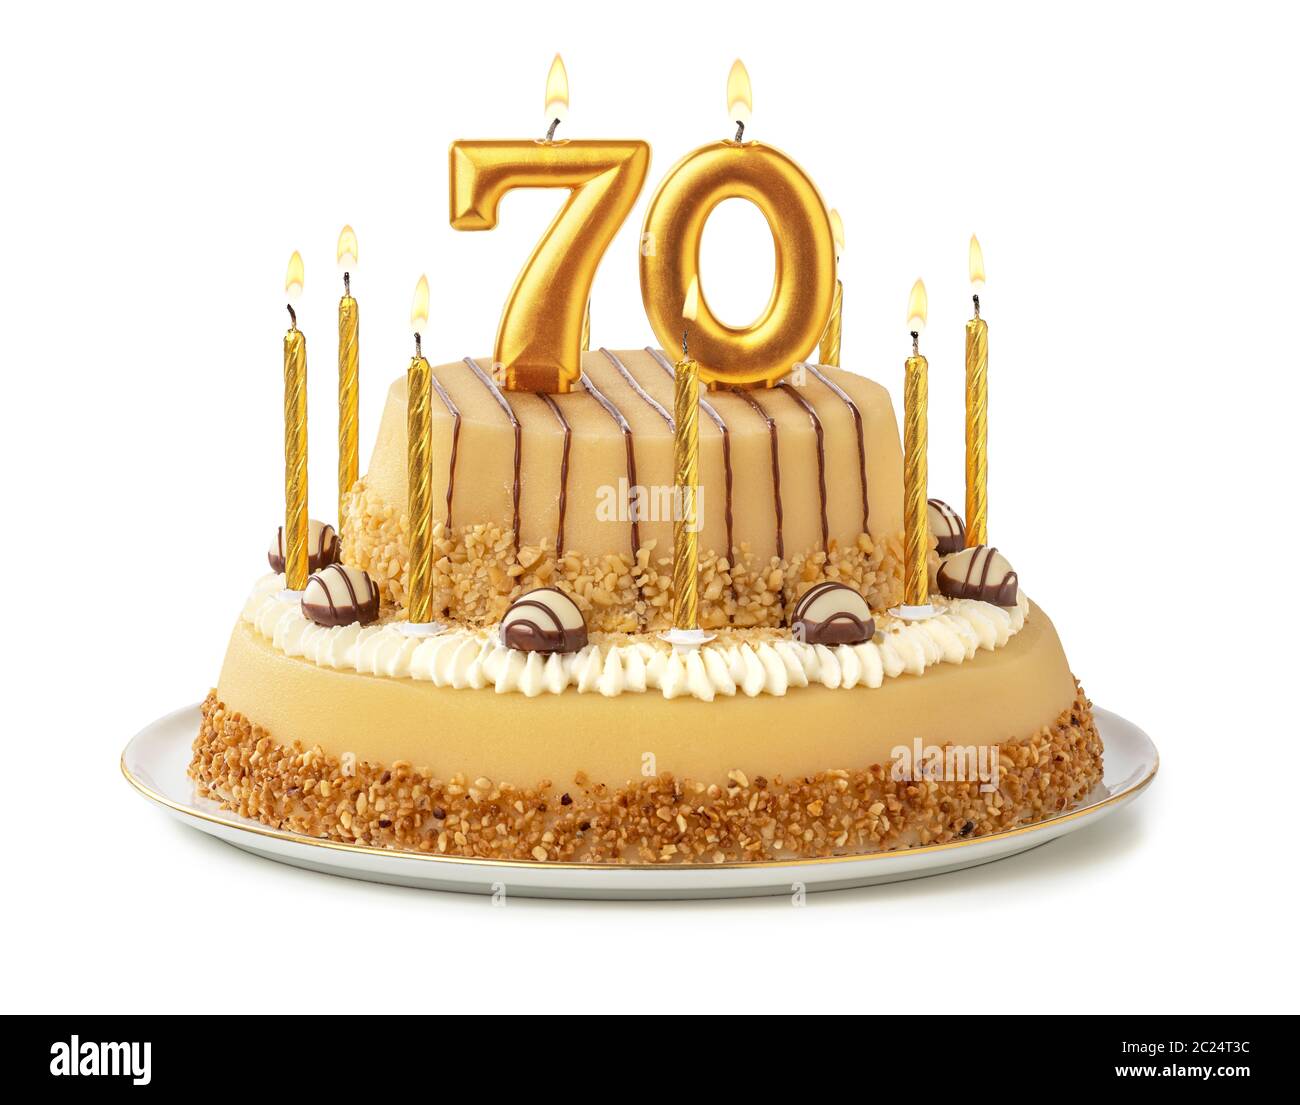 Festive cake with golden candles - Number 70 Stock Photo